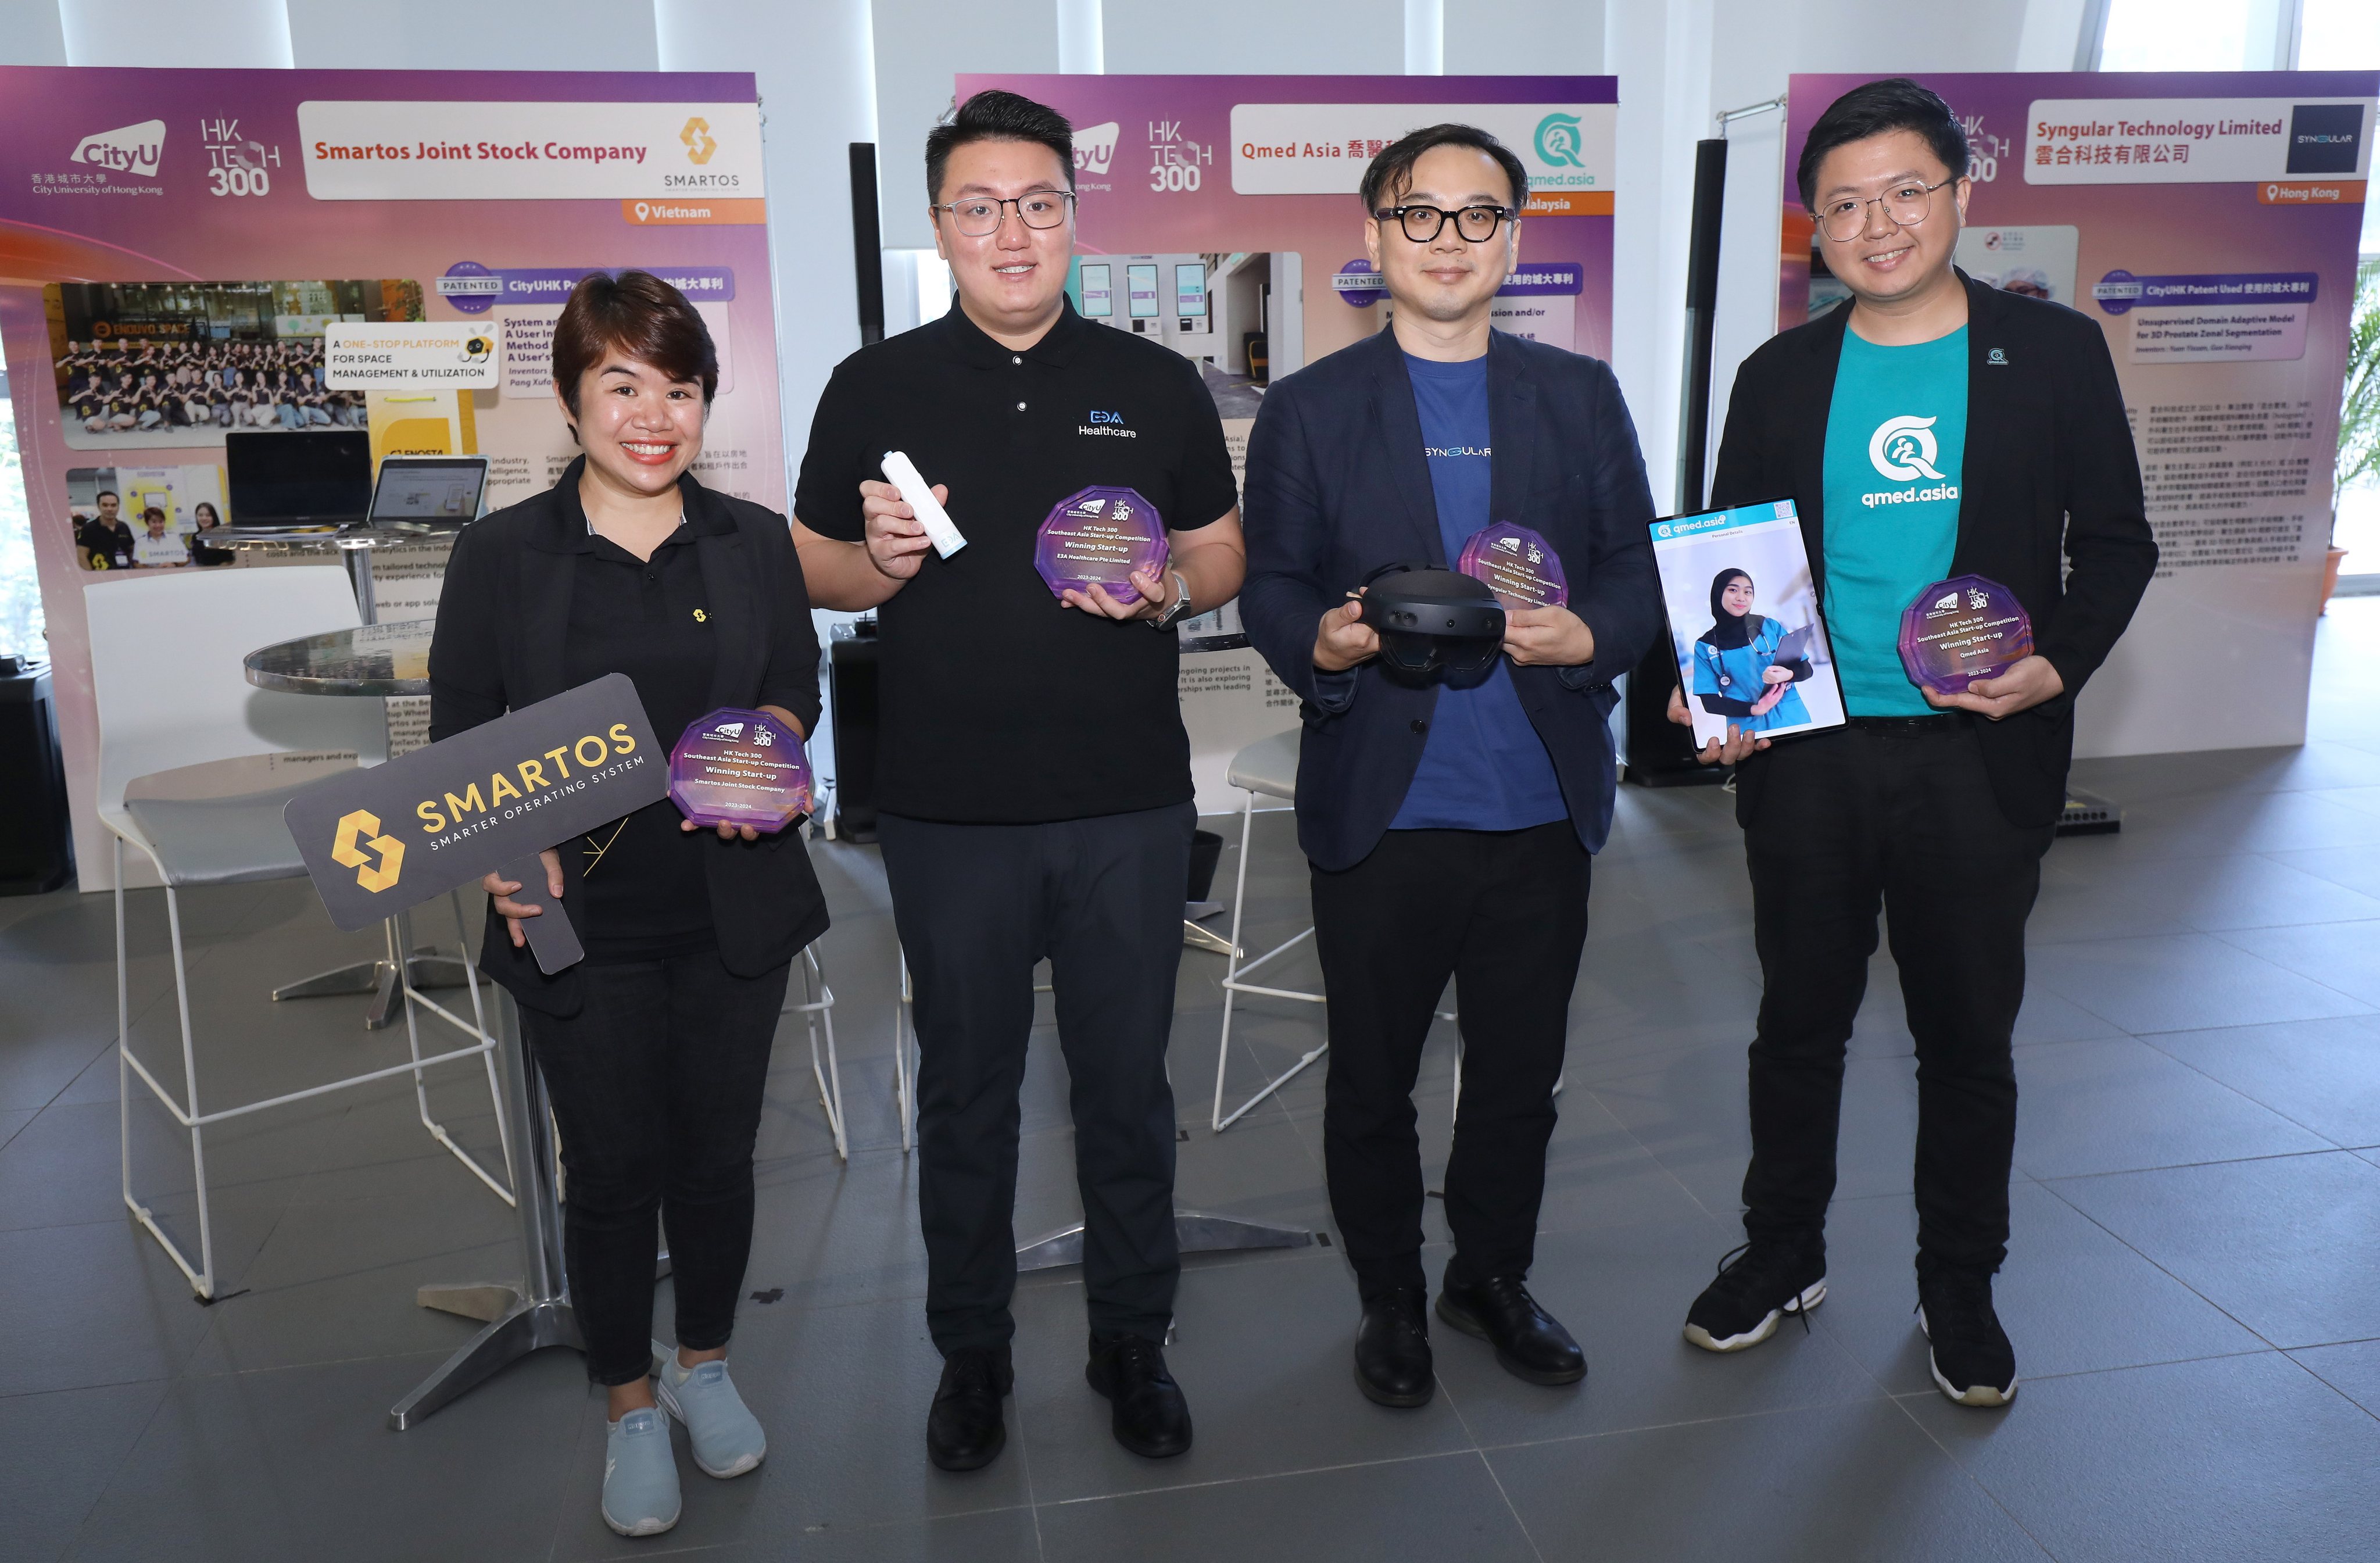 Competition winners (from left) Tran Hanh Trang of Smartos, Harry Chen from E3A Healthcare, Louis Sze of Syngular in Hong Kong and Dr Kev Lim of Malaysia’s Qmed Asia. Photo: Handout